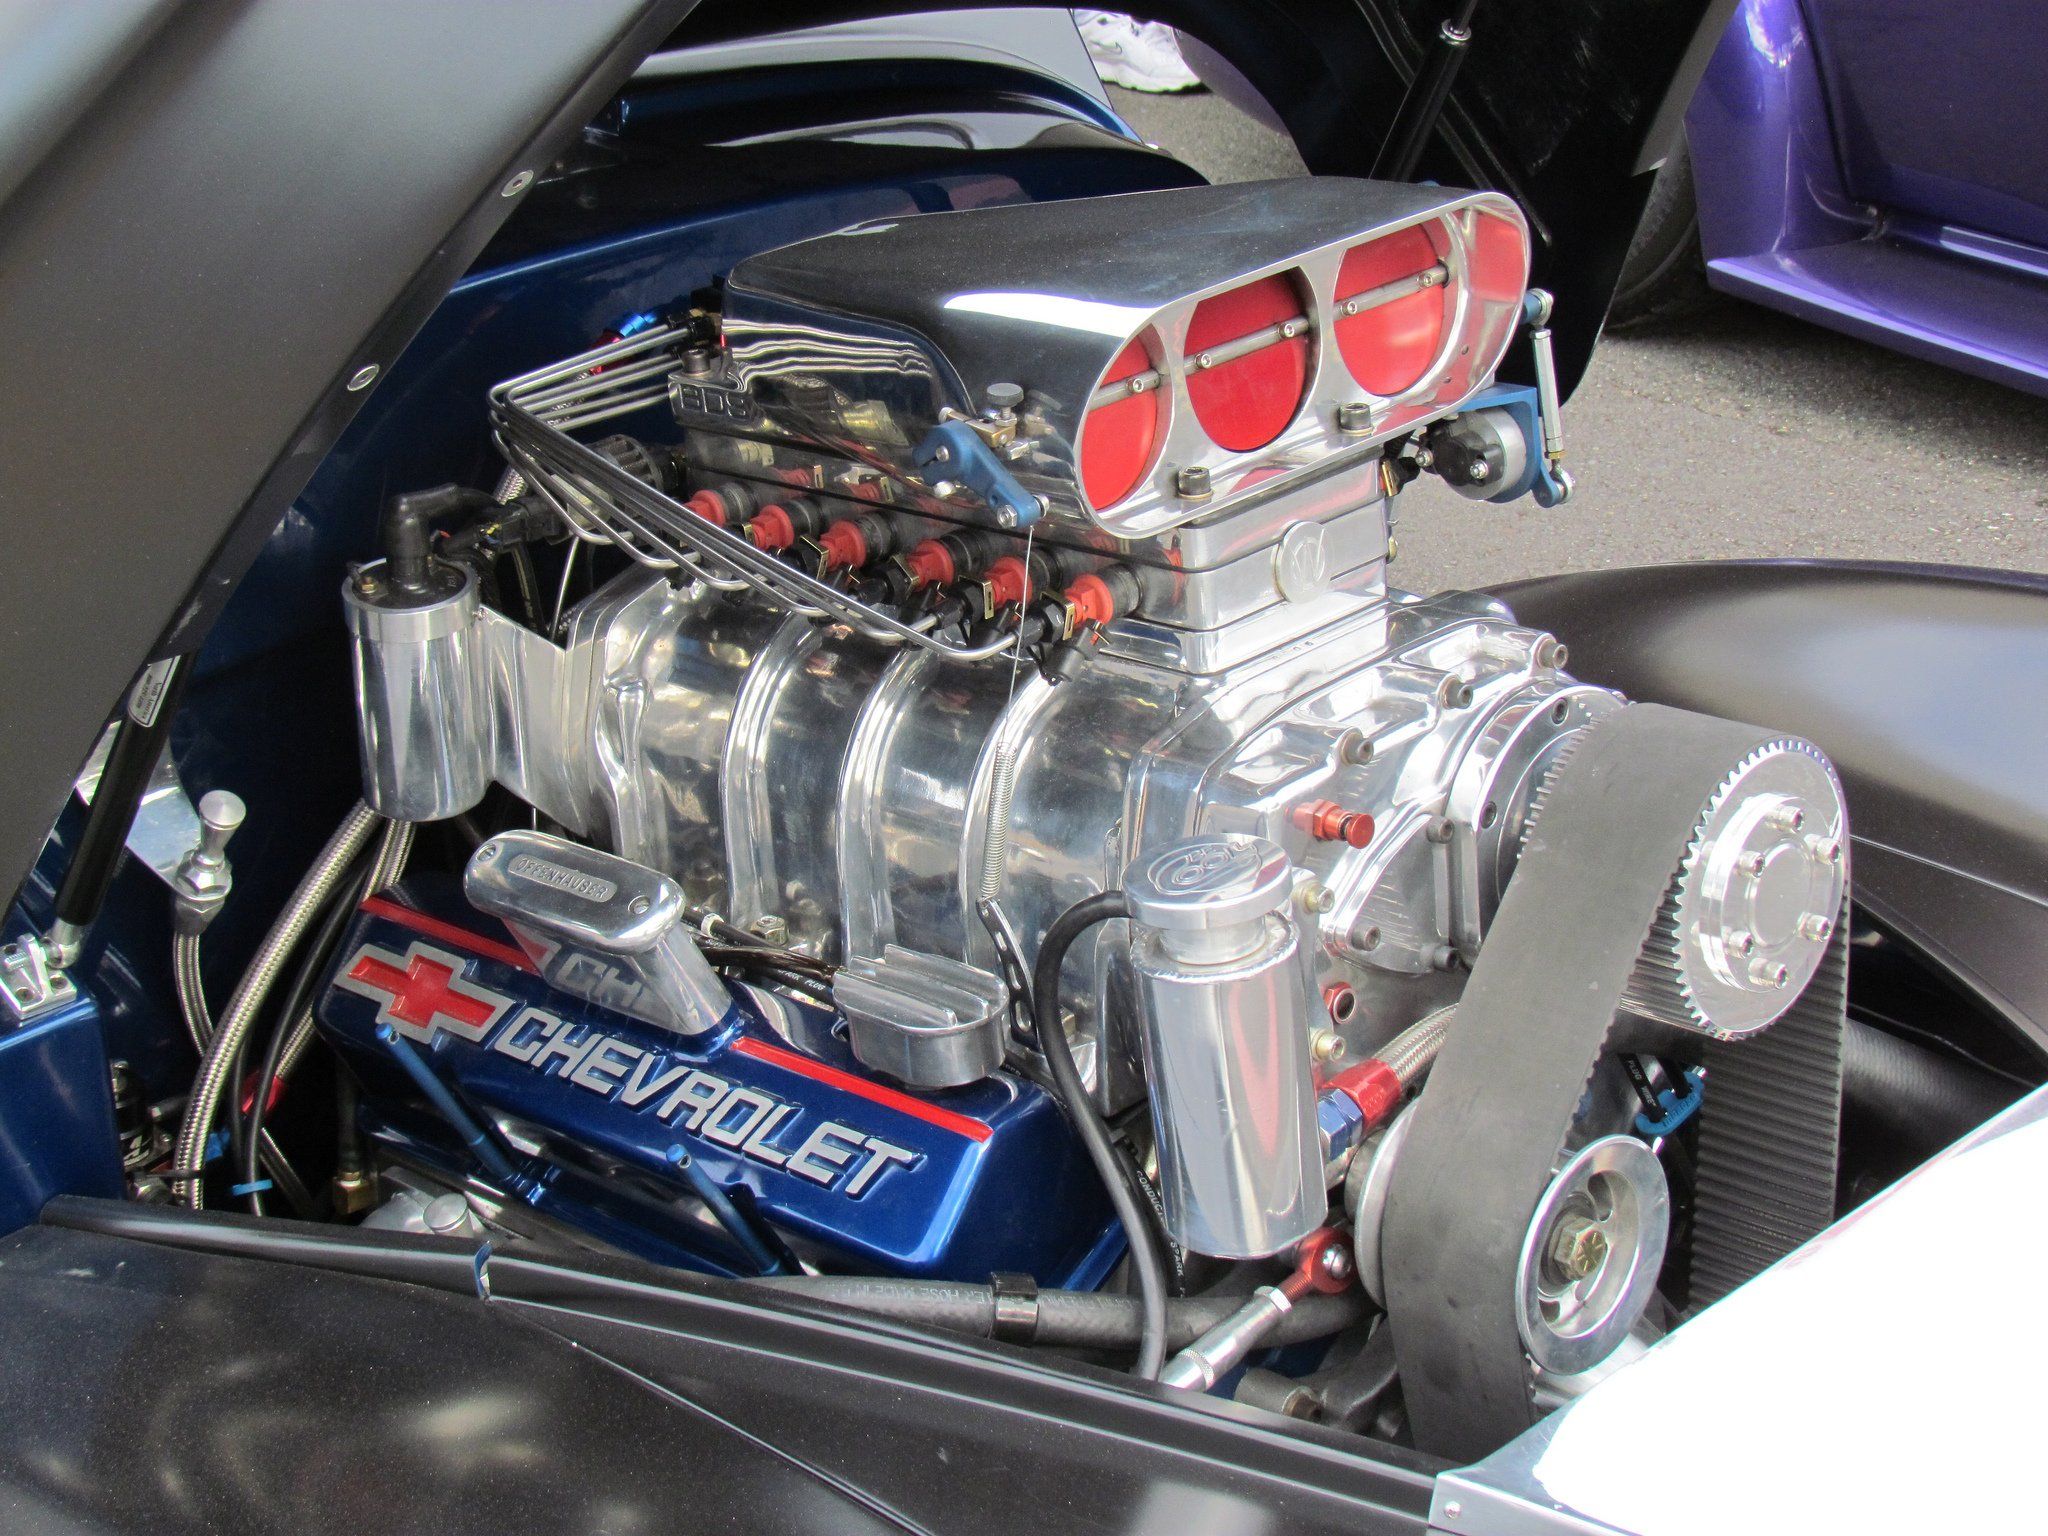 Chevrolet Engine Wallpapers